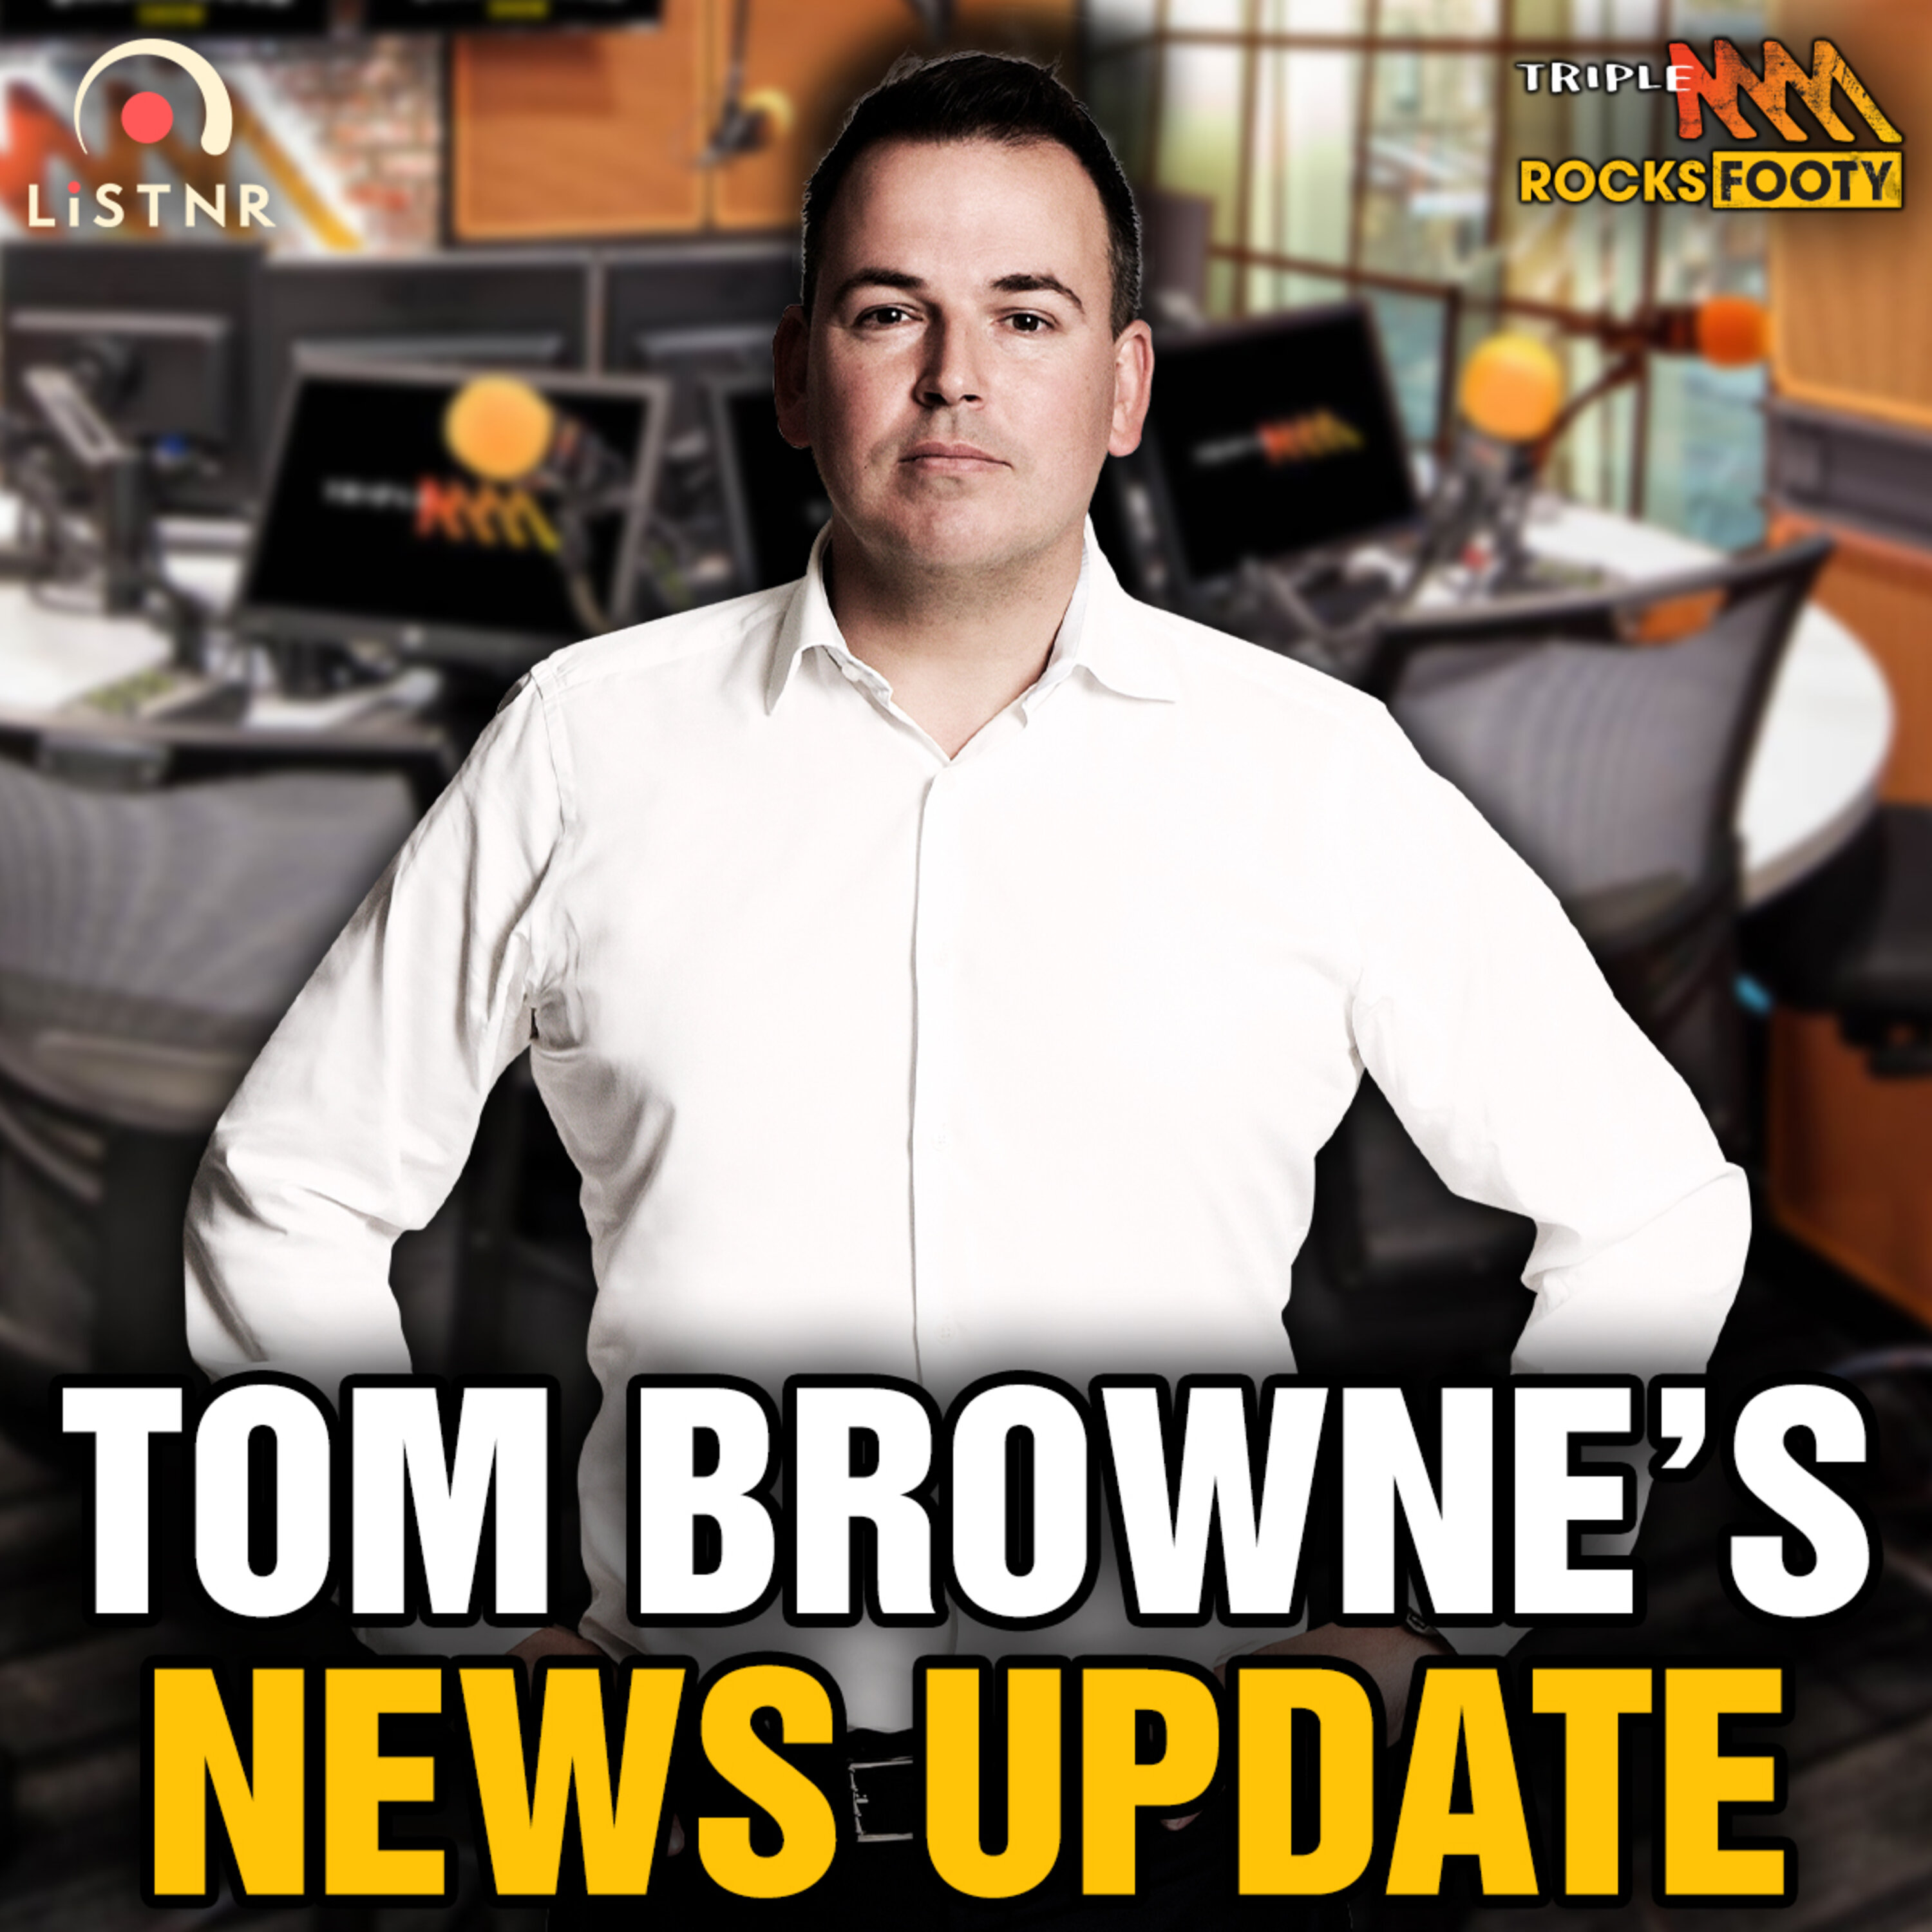 Tom Browne's News | Essendon’s interest in Alastair Clarkson, how Richmond retirements could lead to Tim Taranto coming in, Jason Horne-Francis coming back through the VFL